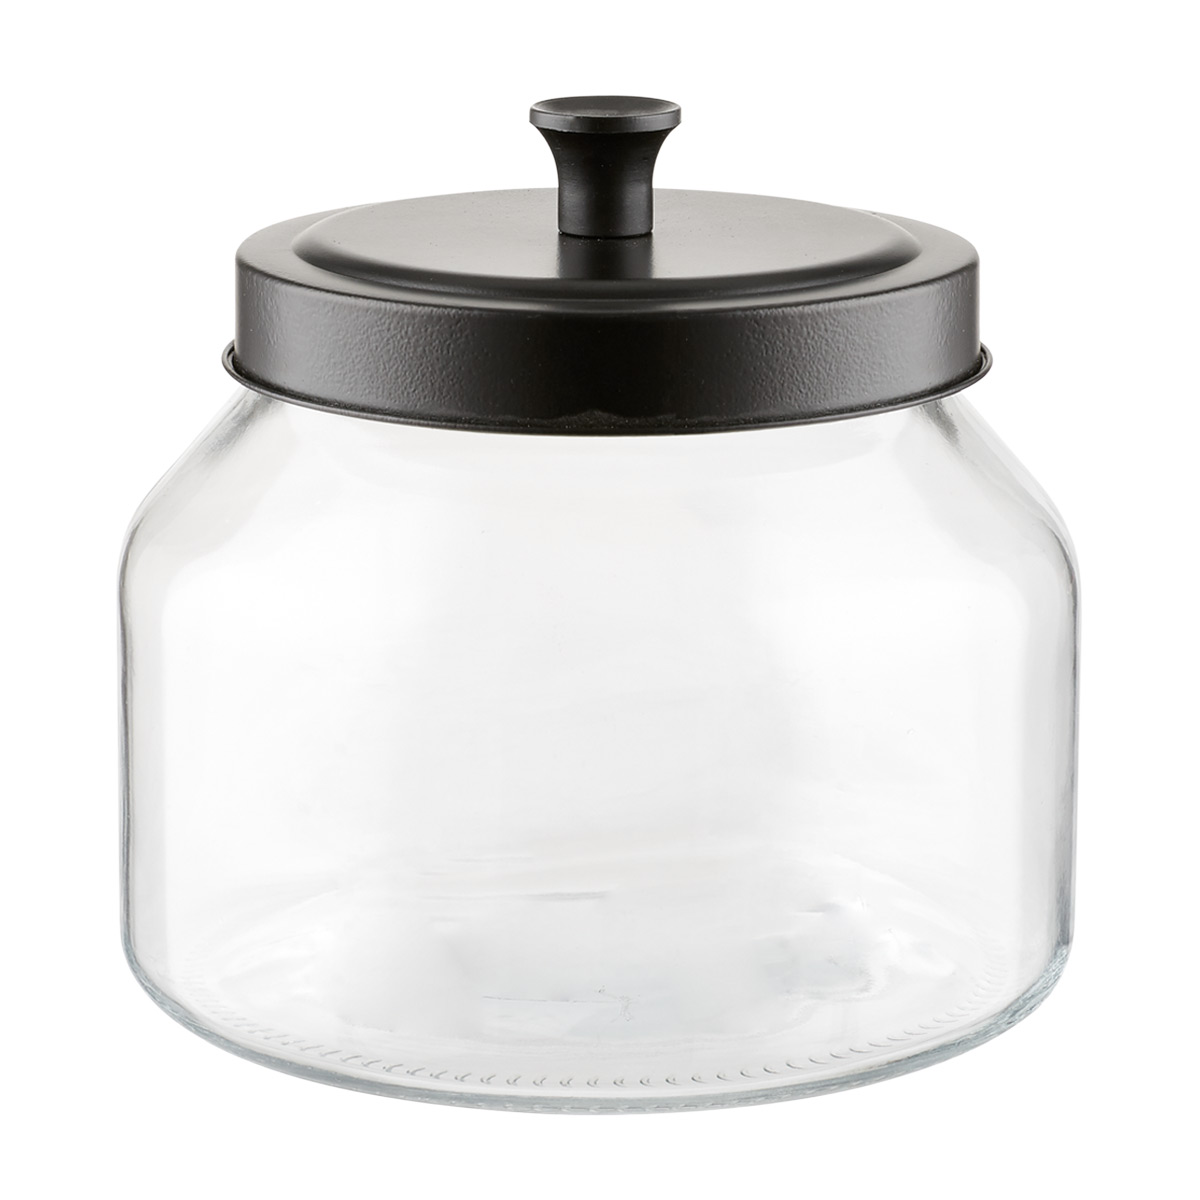 https://images.containerstore.com/catalogimages/345089/10074986-glass-canister-black-matte-.jpg